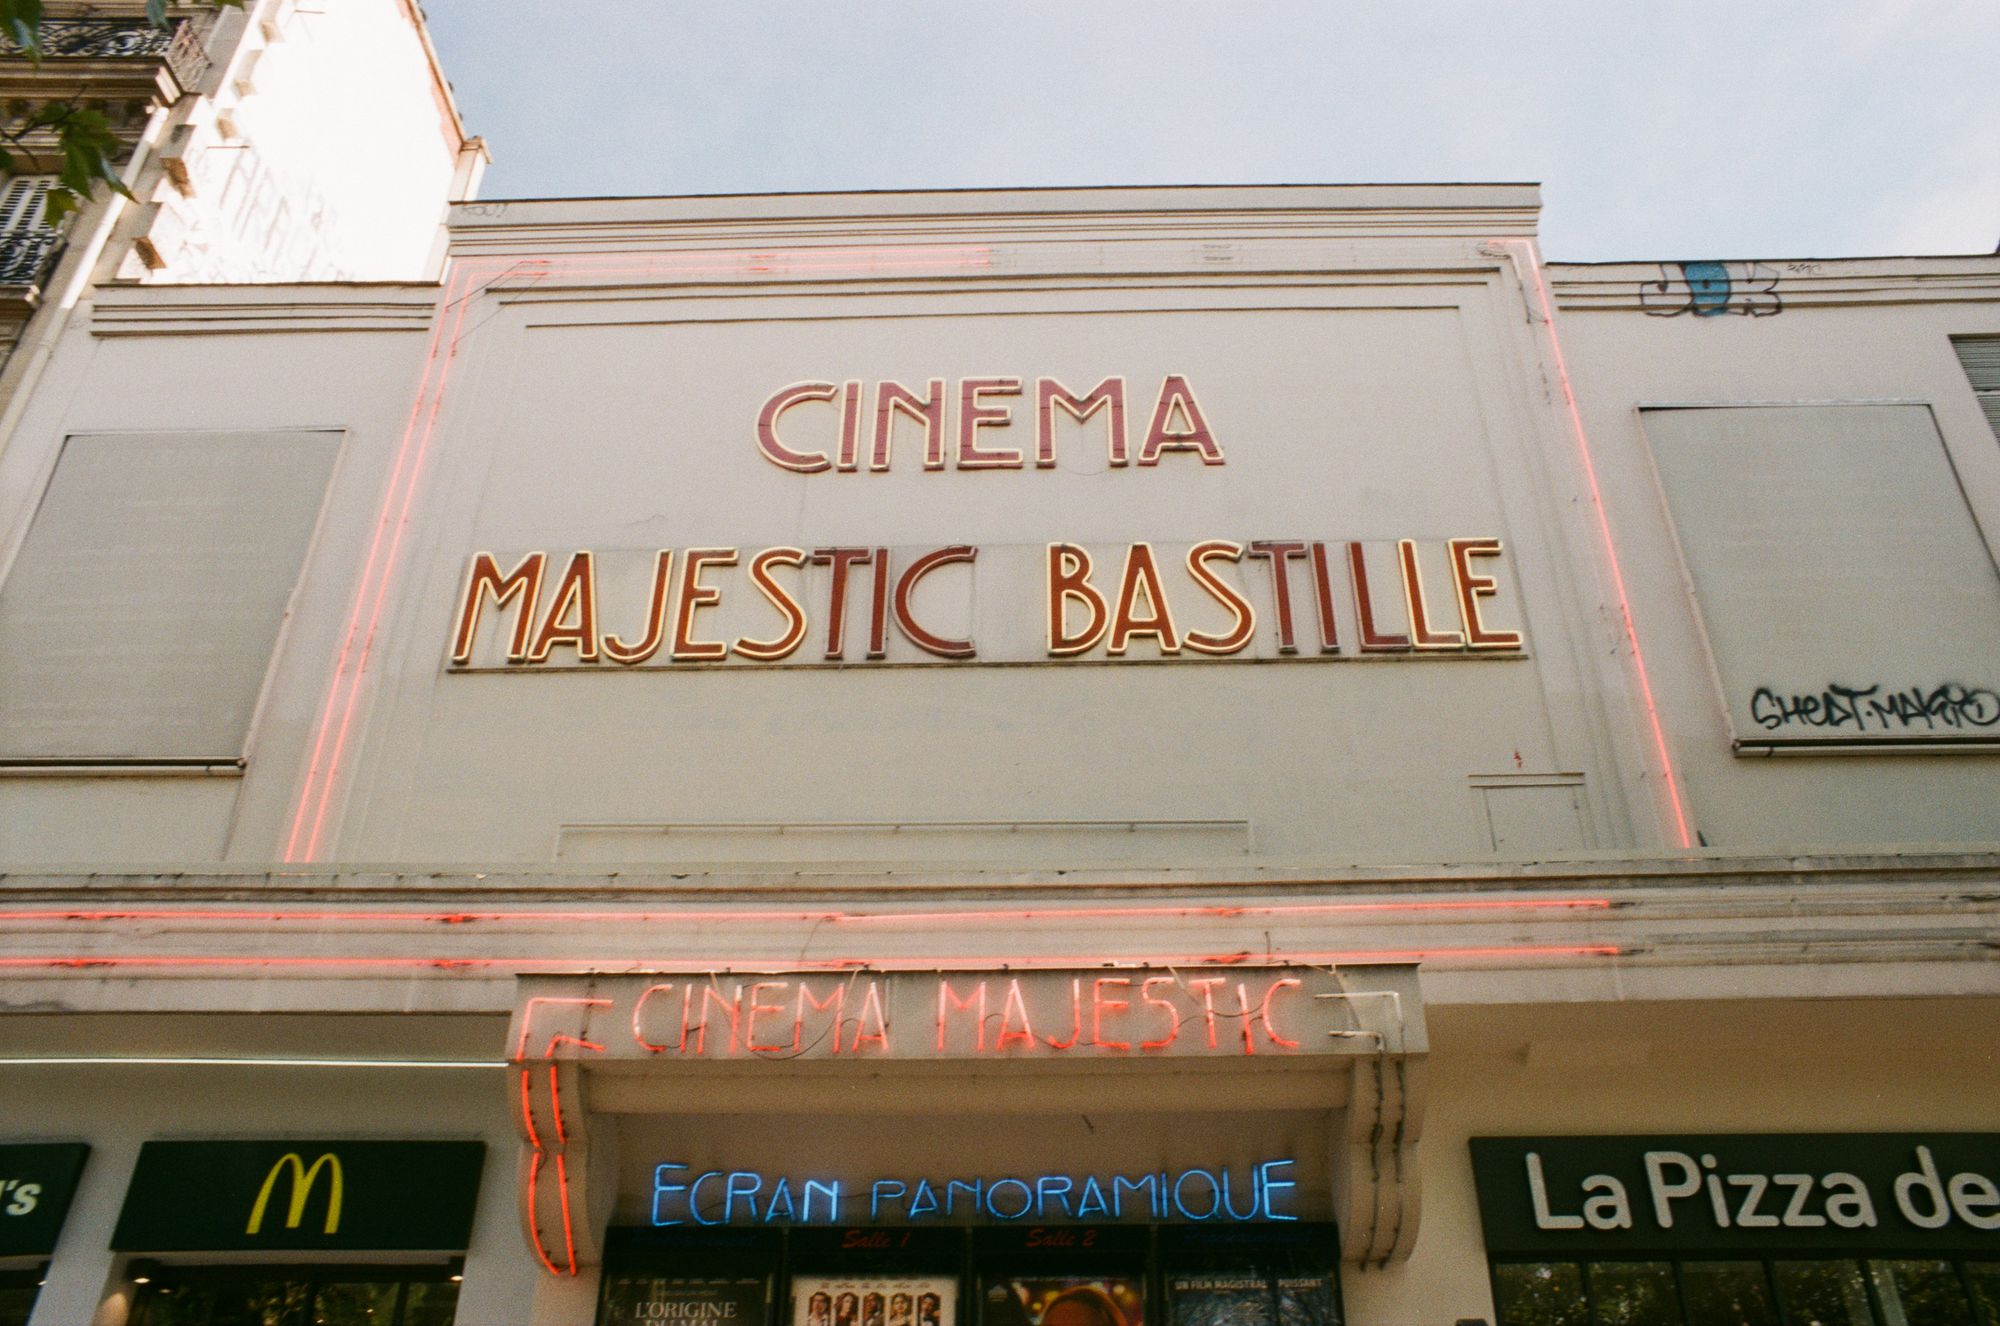 The façade of a large cinema, CINEMA MAJESTIC BASTILLE, with red neon signage and a blue neon strip advertising its ECRAN PANORAMIQUE, with a McDonalds and pizza place on either side.